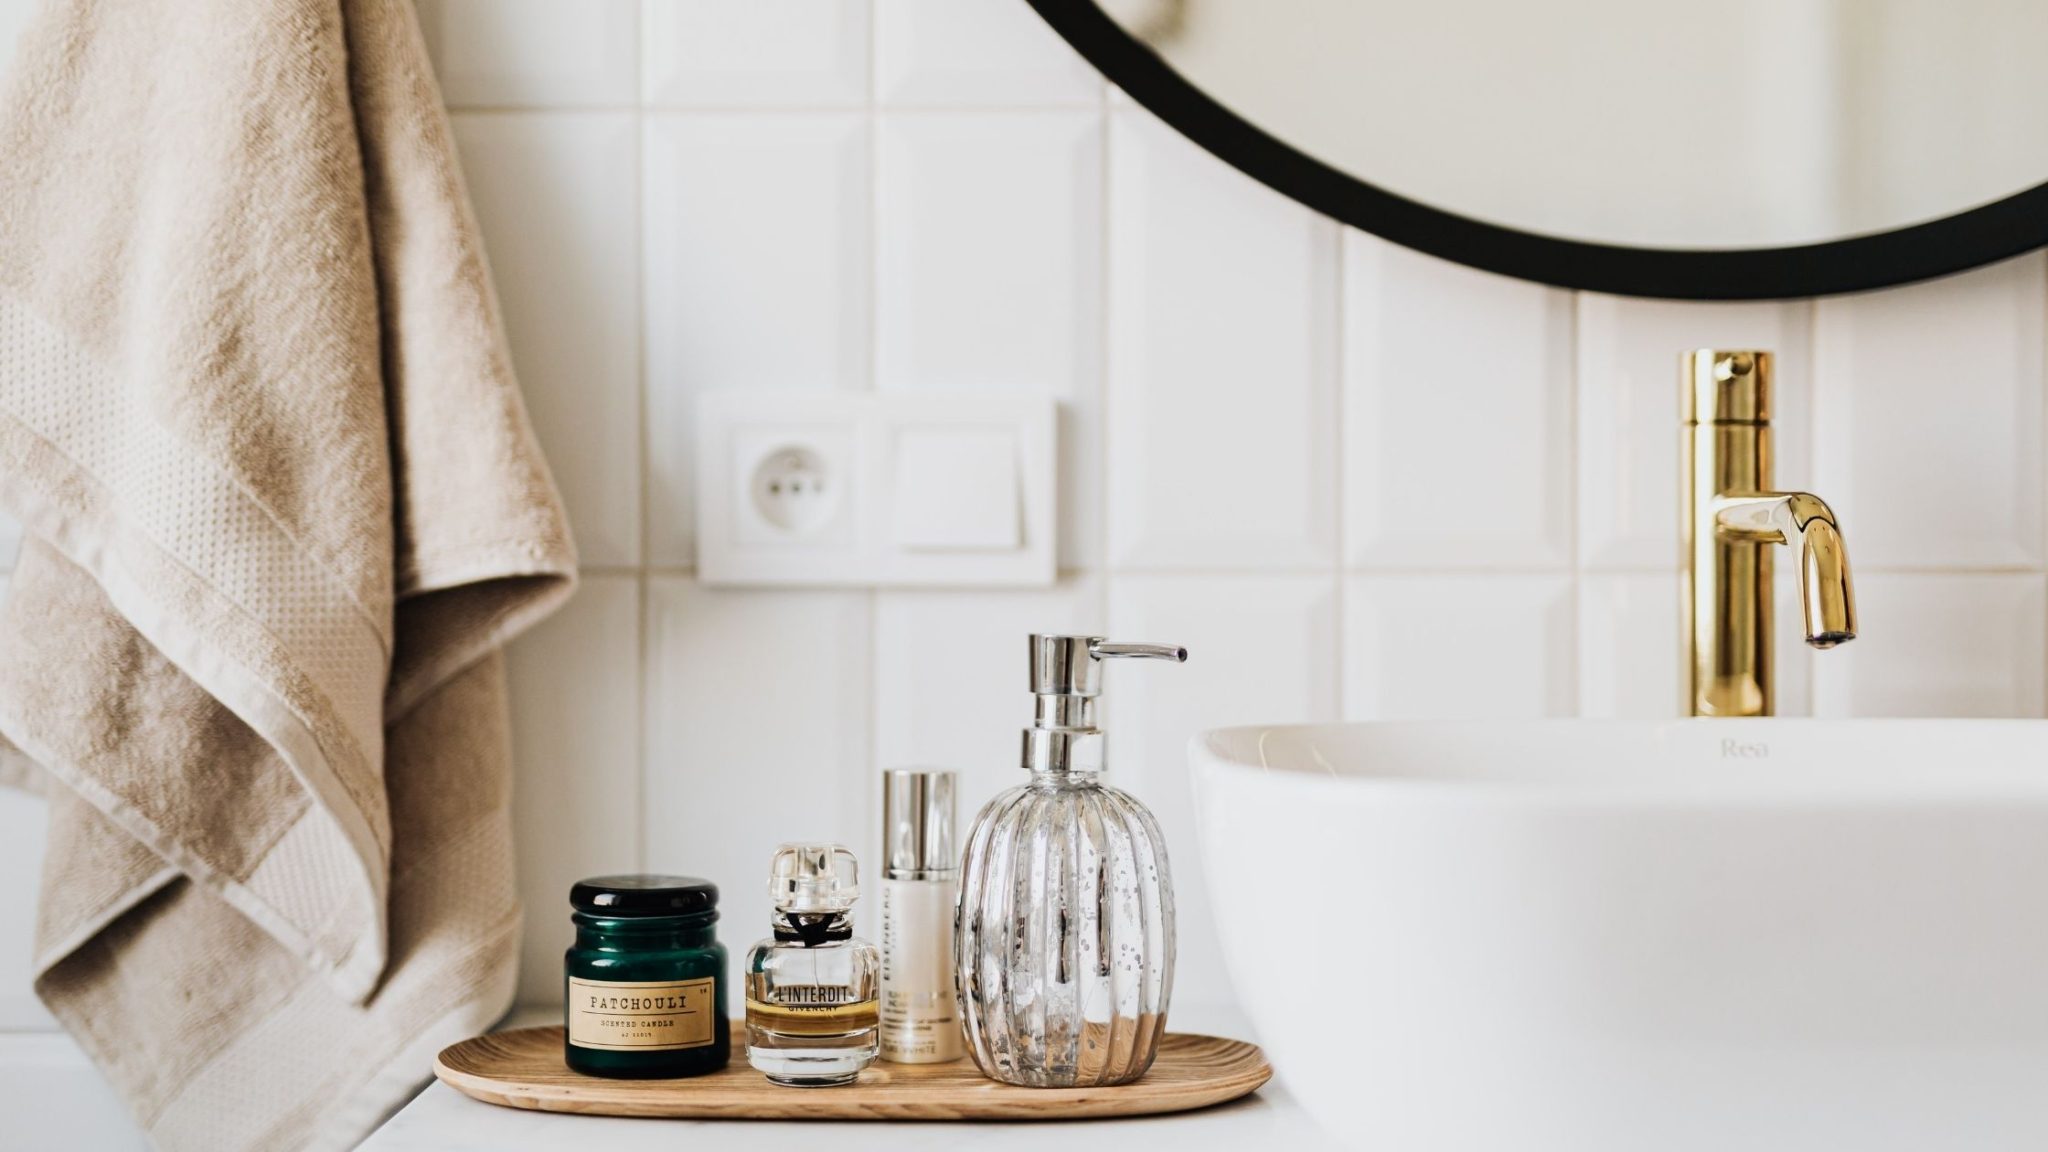 Bathroom counter with skincare products